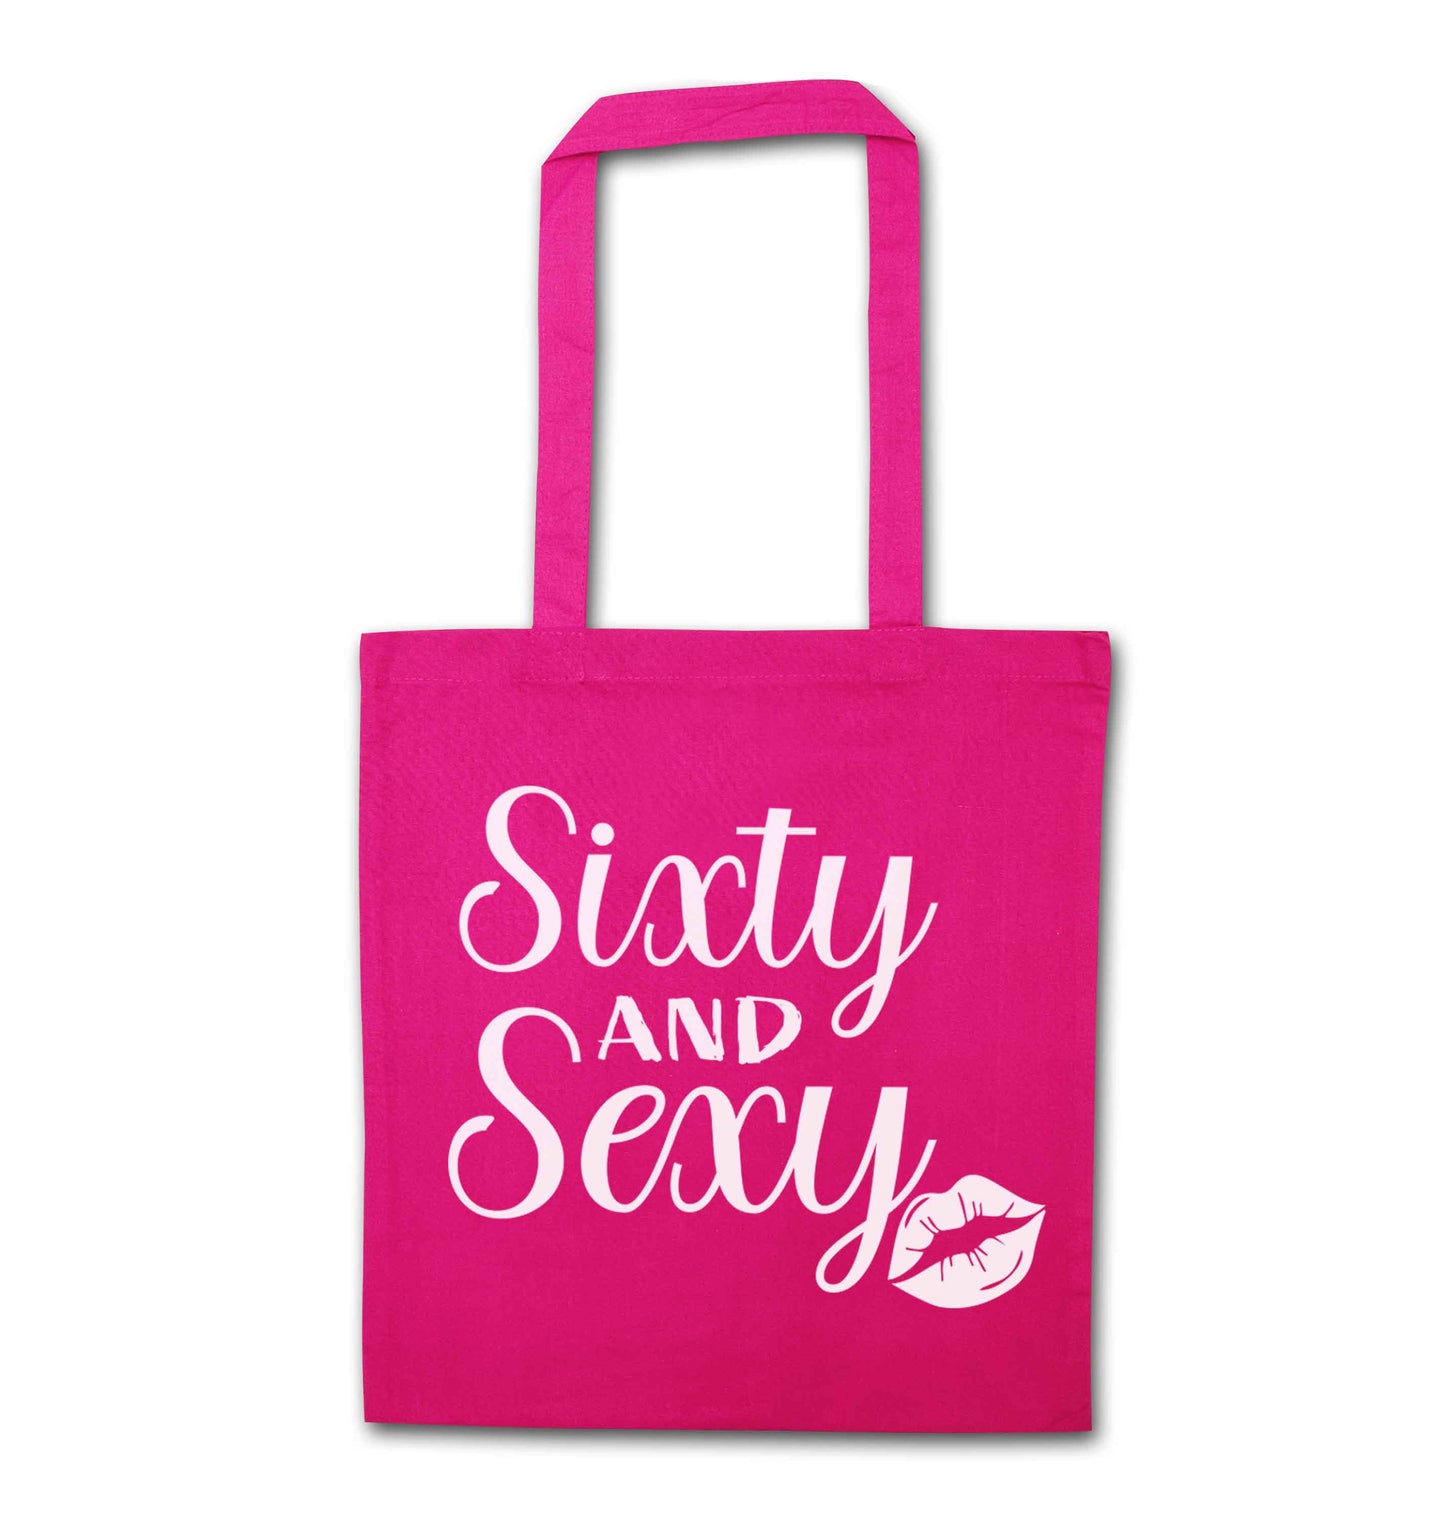 Sixty and sexy pink tote bag